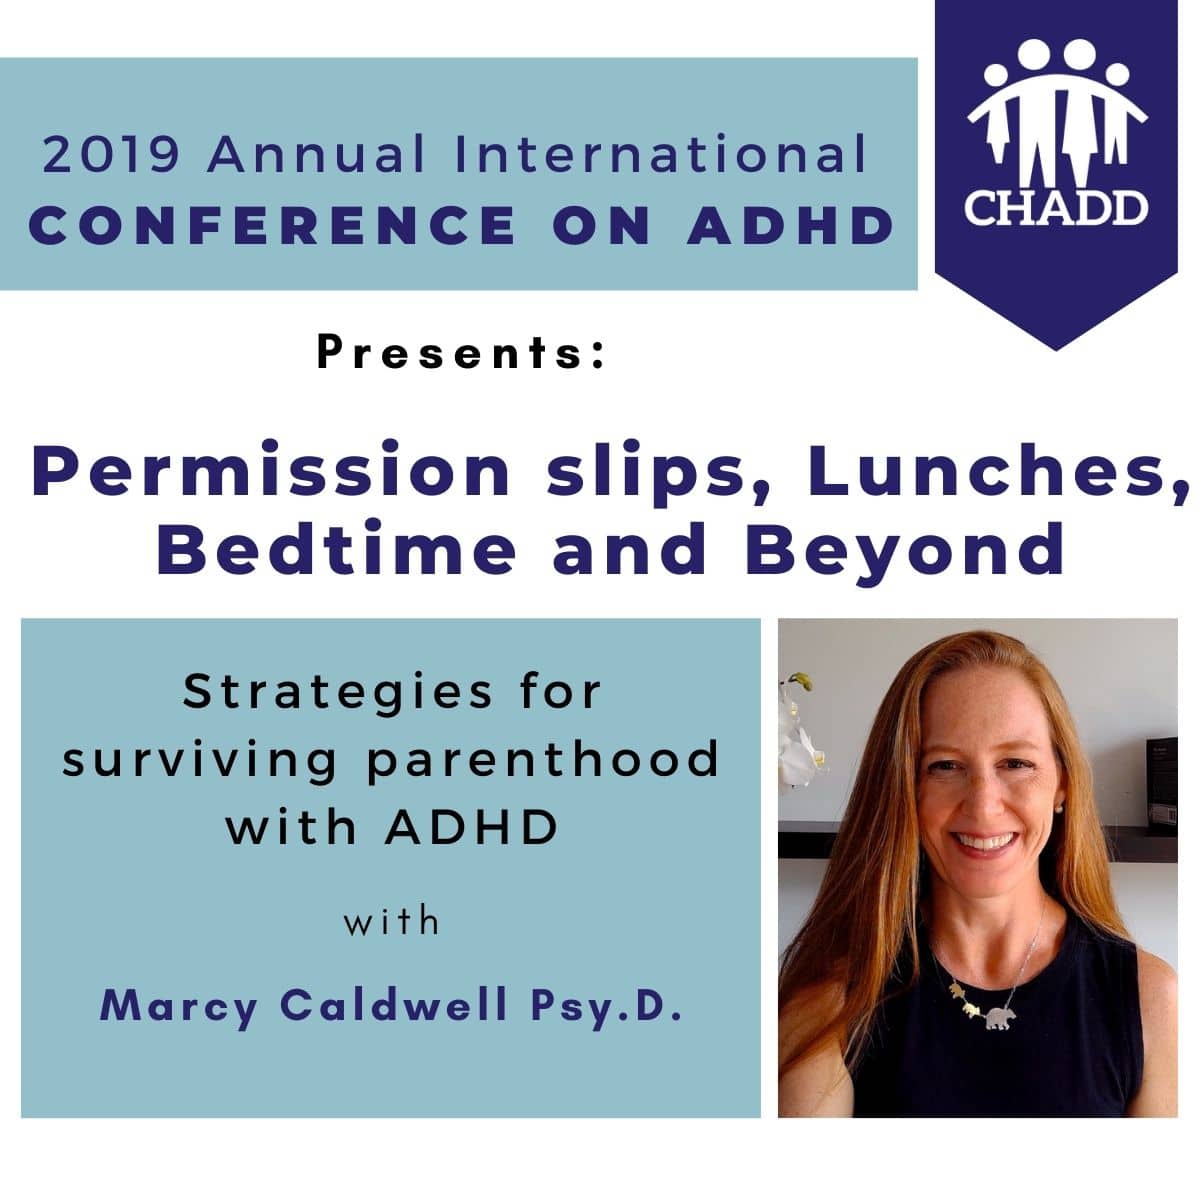 2019 Annual International Conference on ADHD